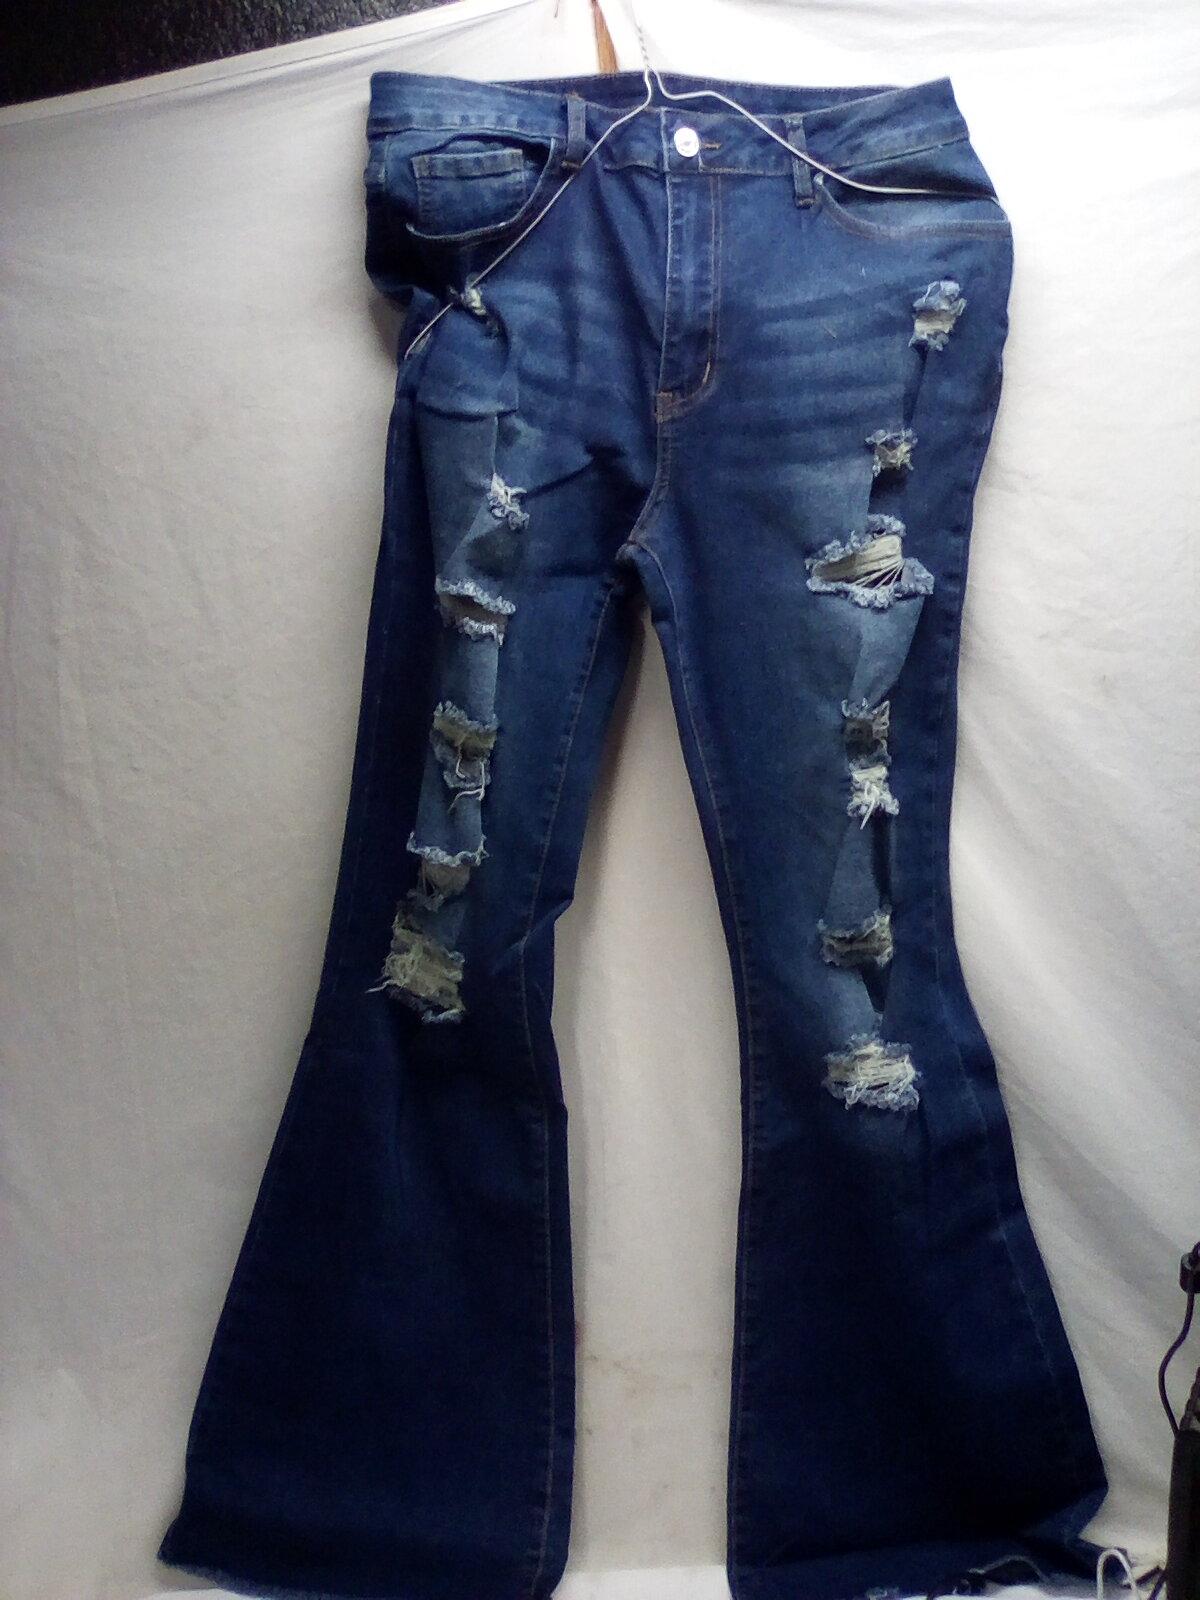 QTY 1 Jeans with hole decorations, size XL